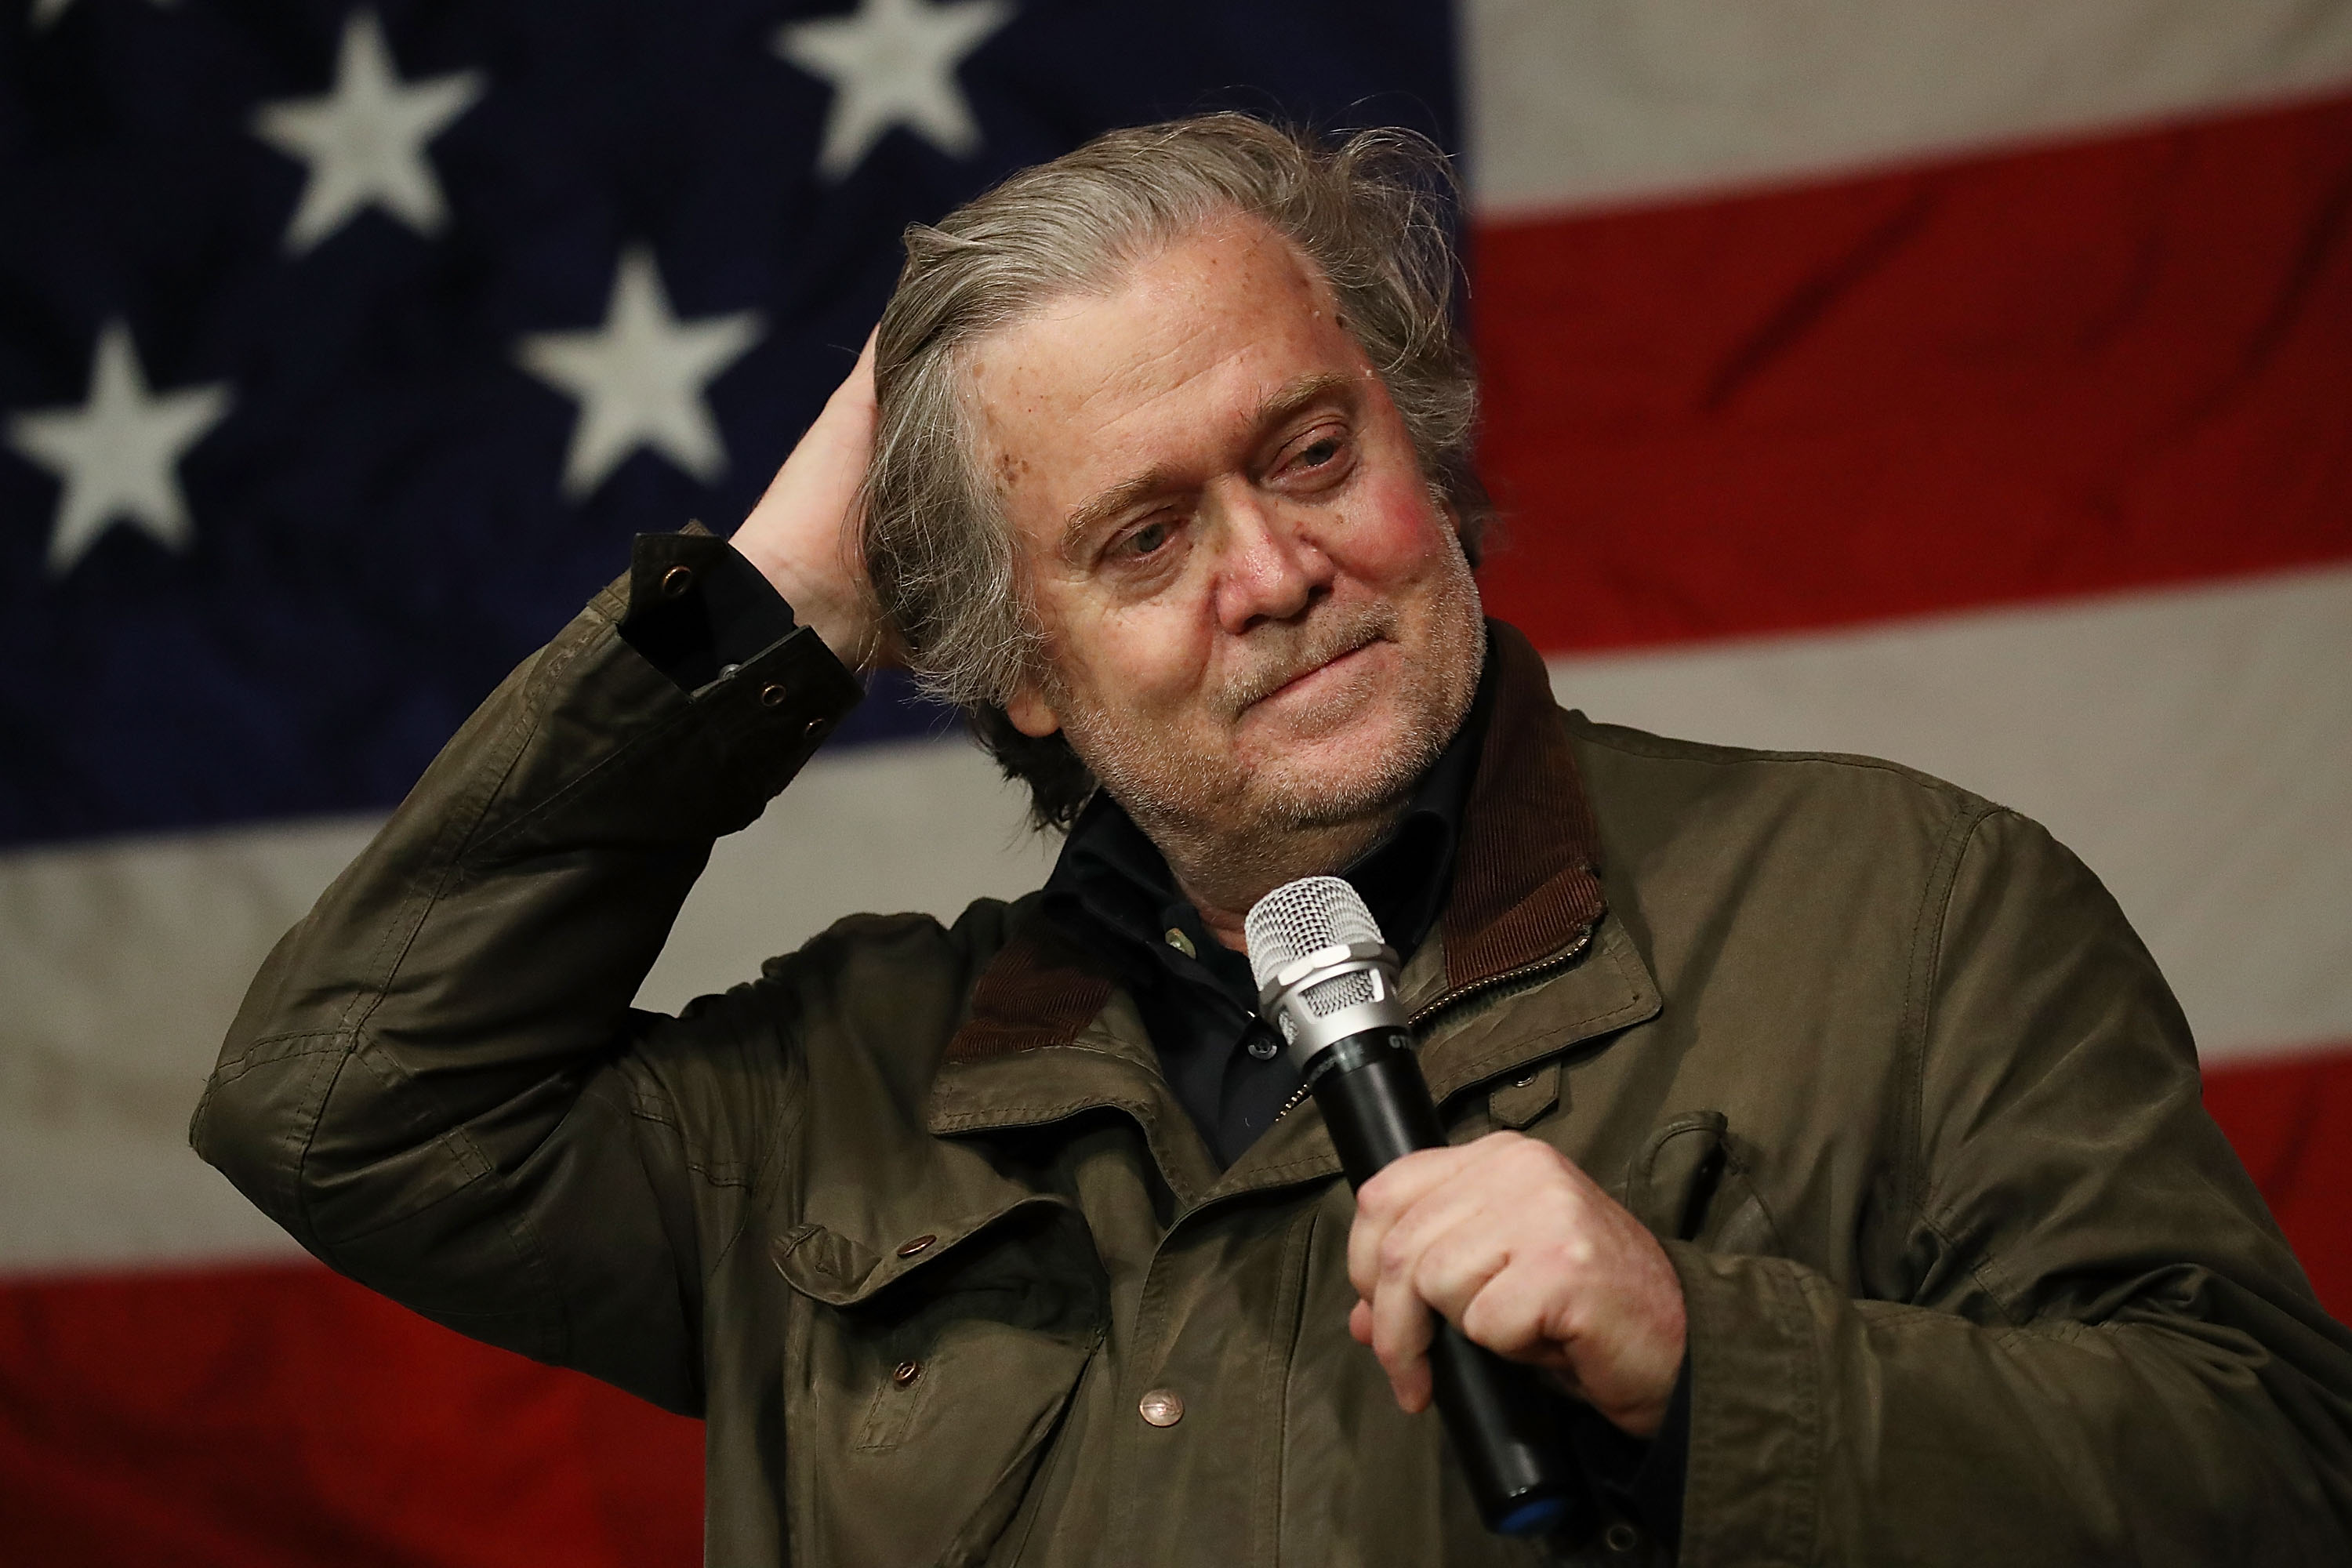 Steve Bannon Issues Grovelling Apology For Being Rude About Trump’s Son